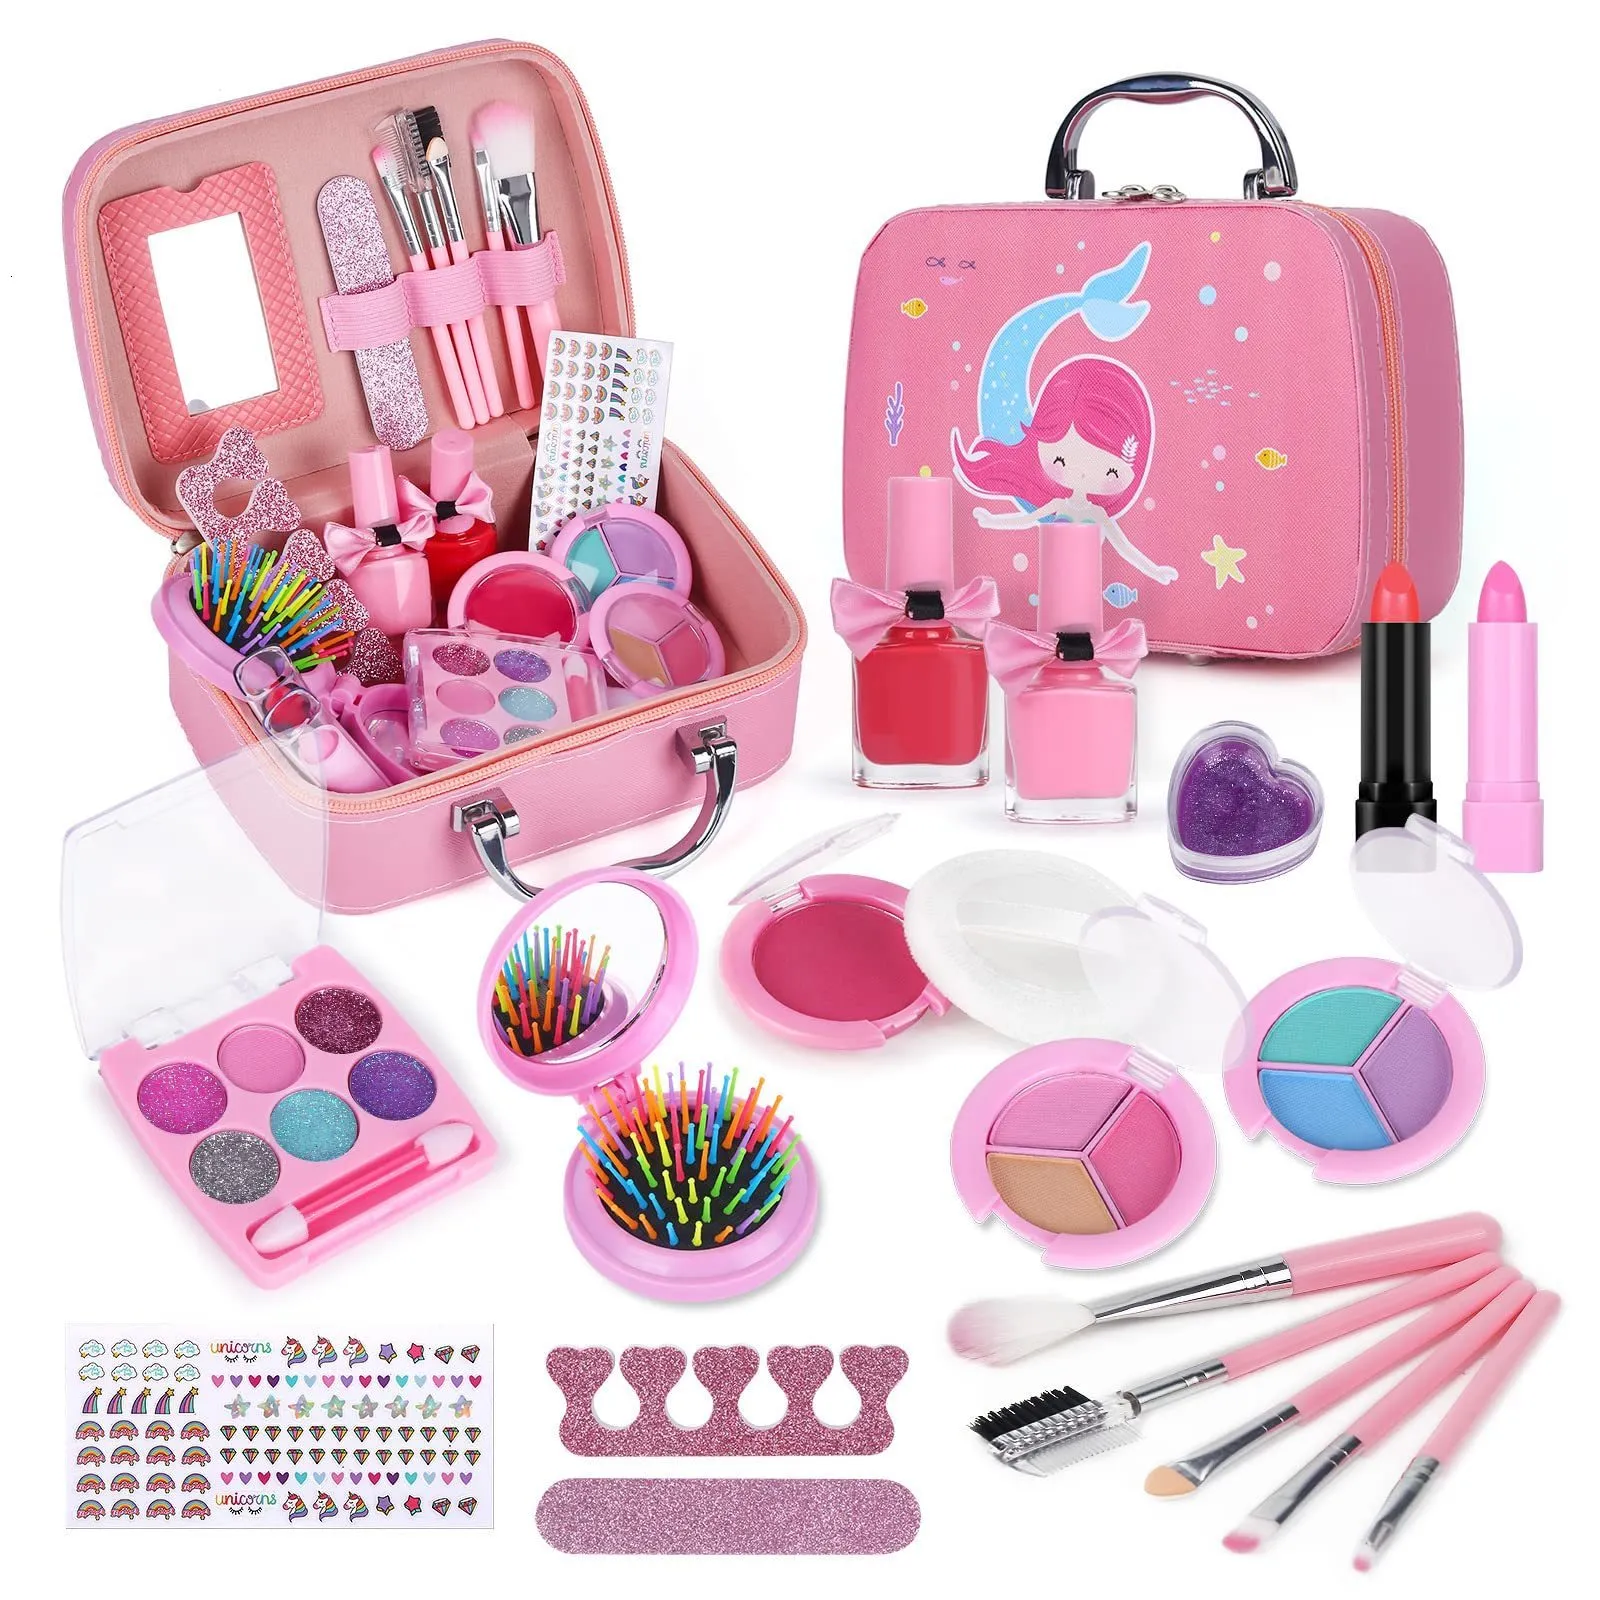 Beauty Fashion Girls Real Makeup Kit Washable Princess Play Set Kids Toys Safe Non Toxic Pretend Birthday for Gifts 230427